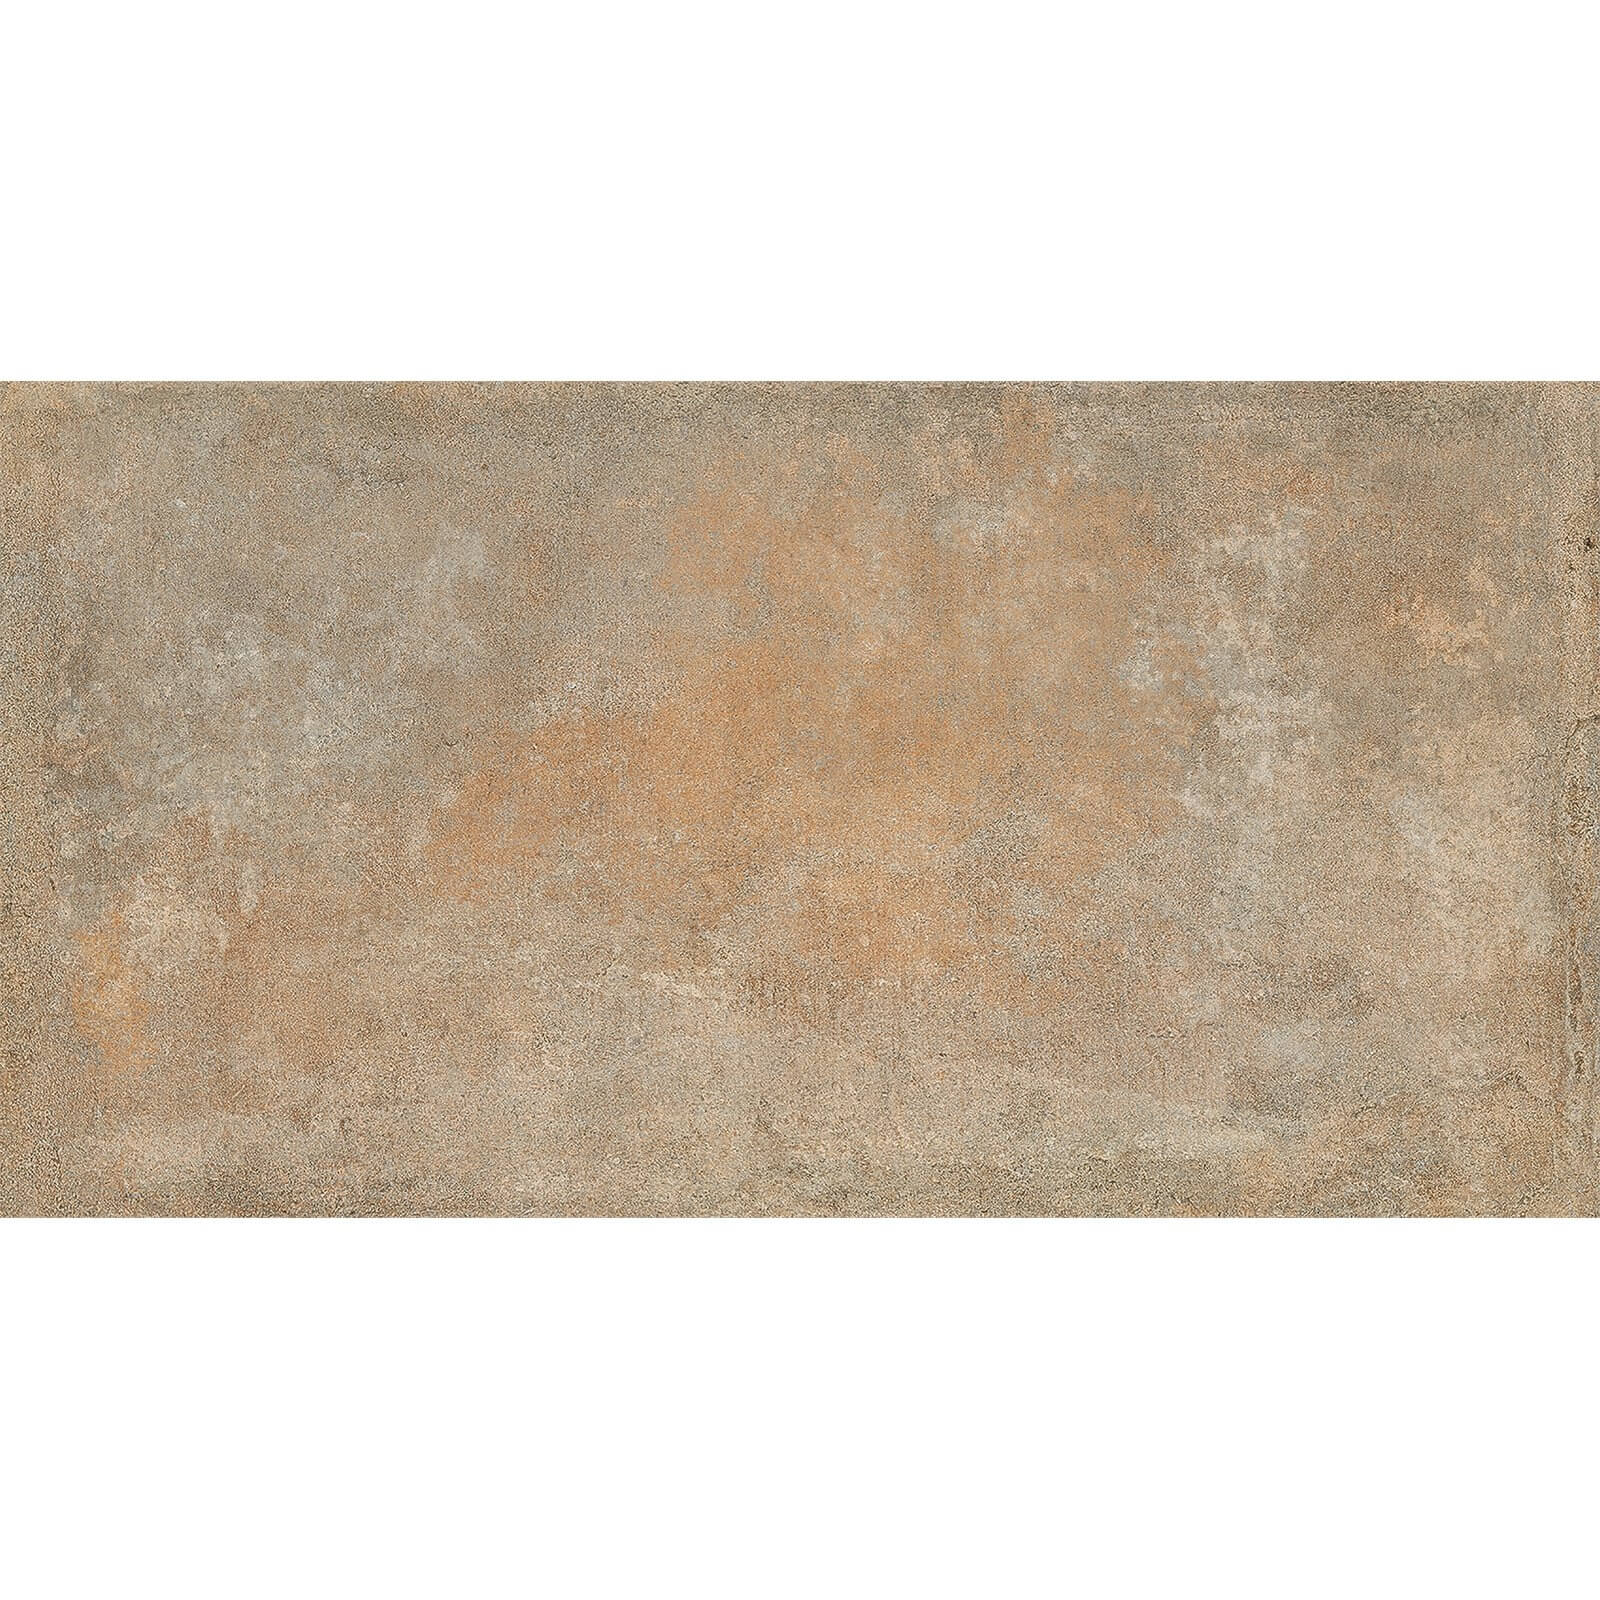 Harad Cotto Wall & Floor Tile - 600 x 300mm